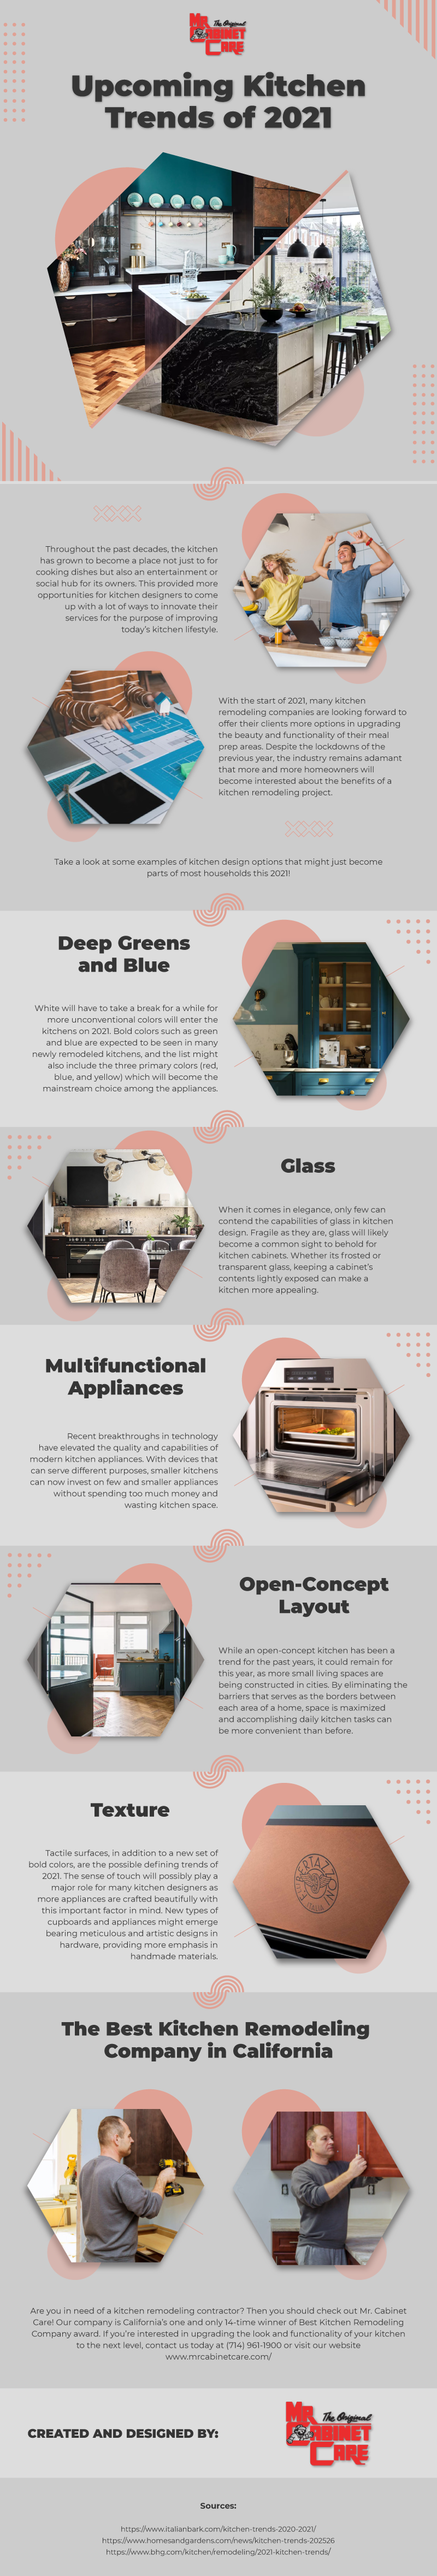 Upcoming Kitchen Trends of 2021 - Infographic